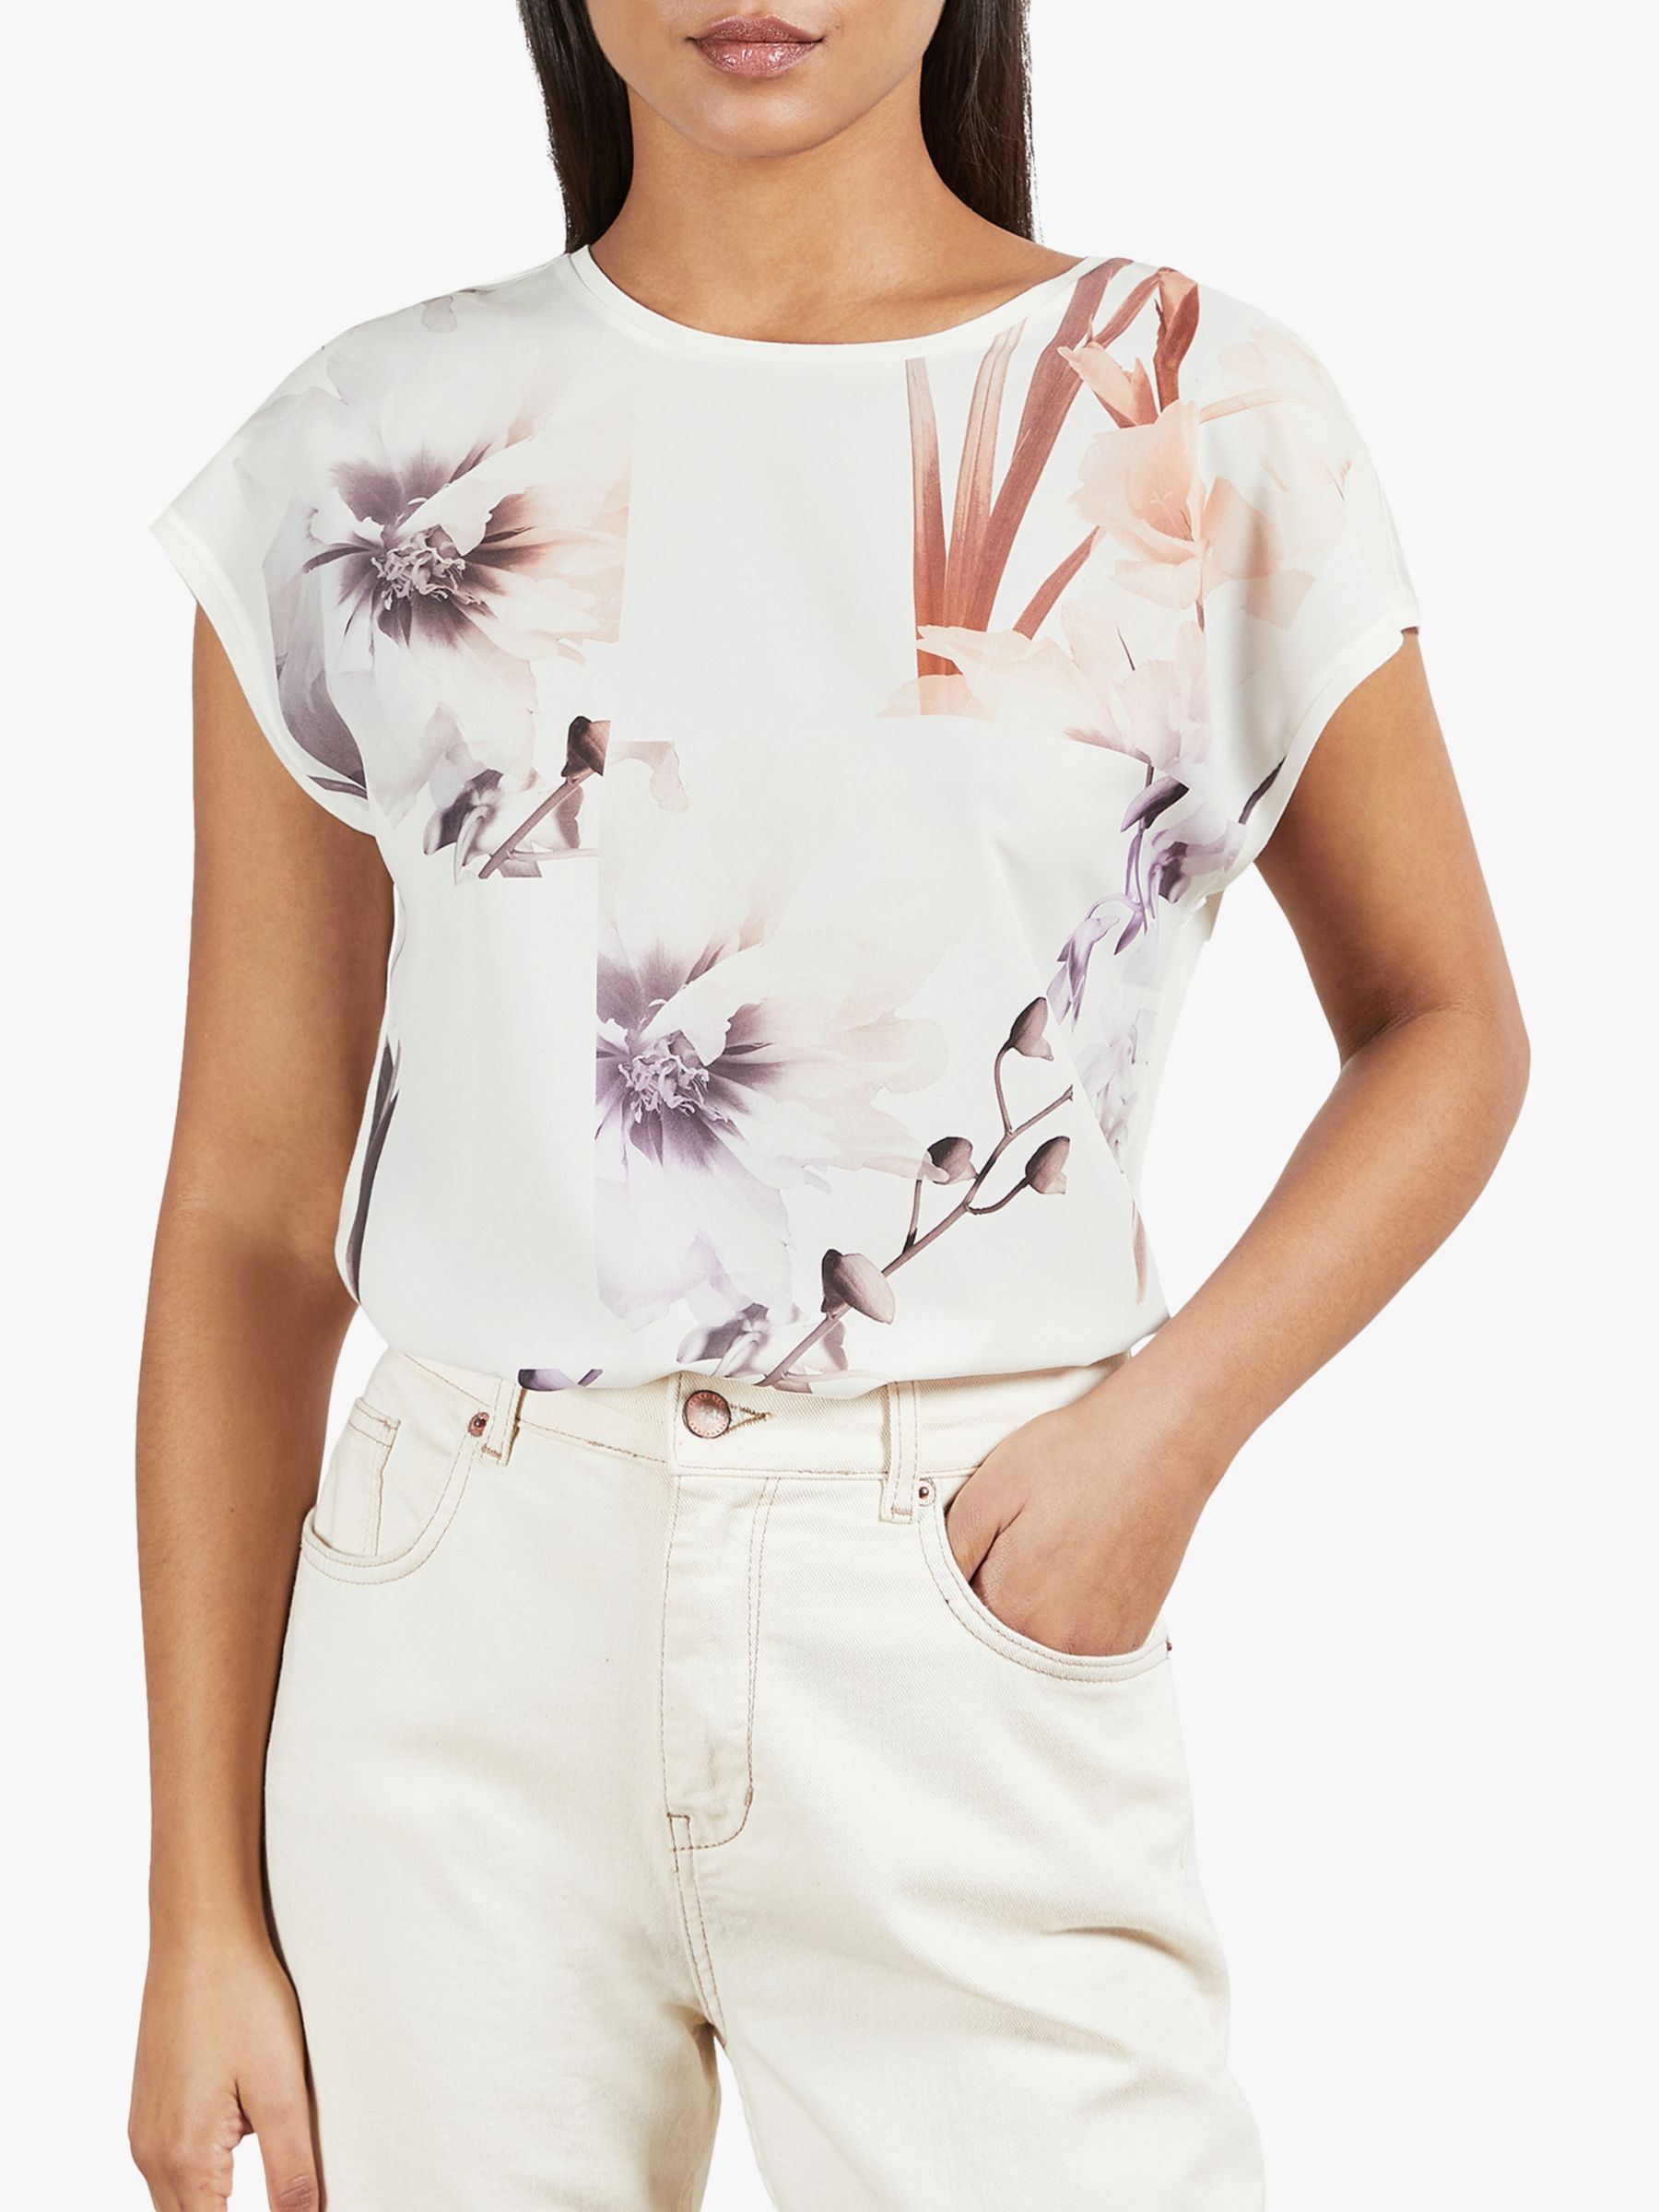 Ted Baker Lylie Floral Print T-Shirt, White/Multi at John Lewis & Partners